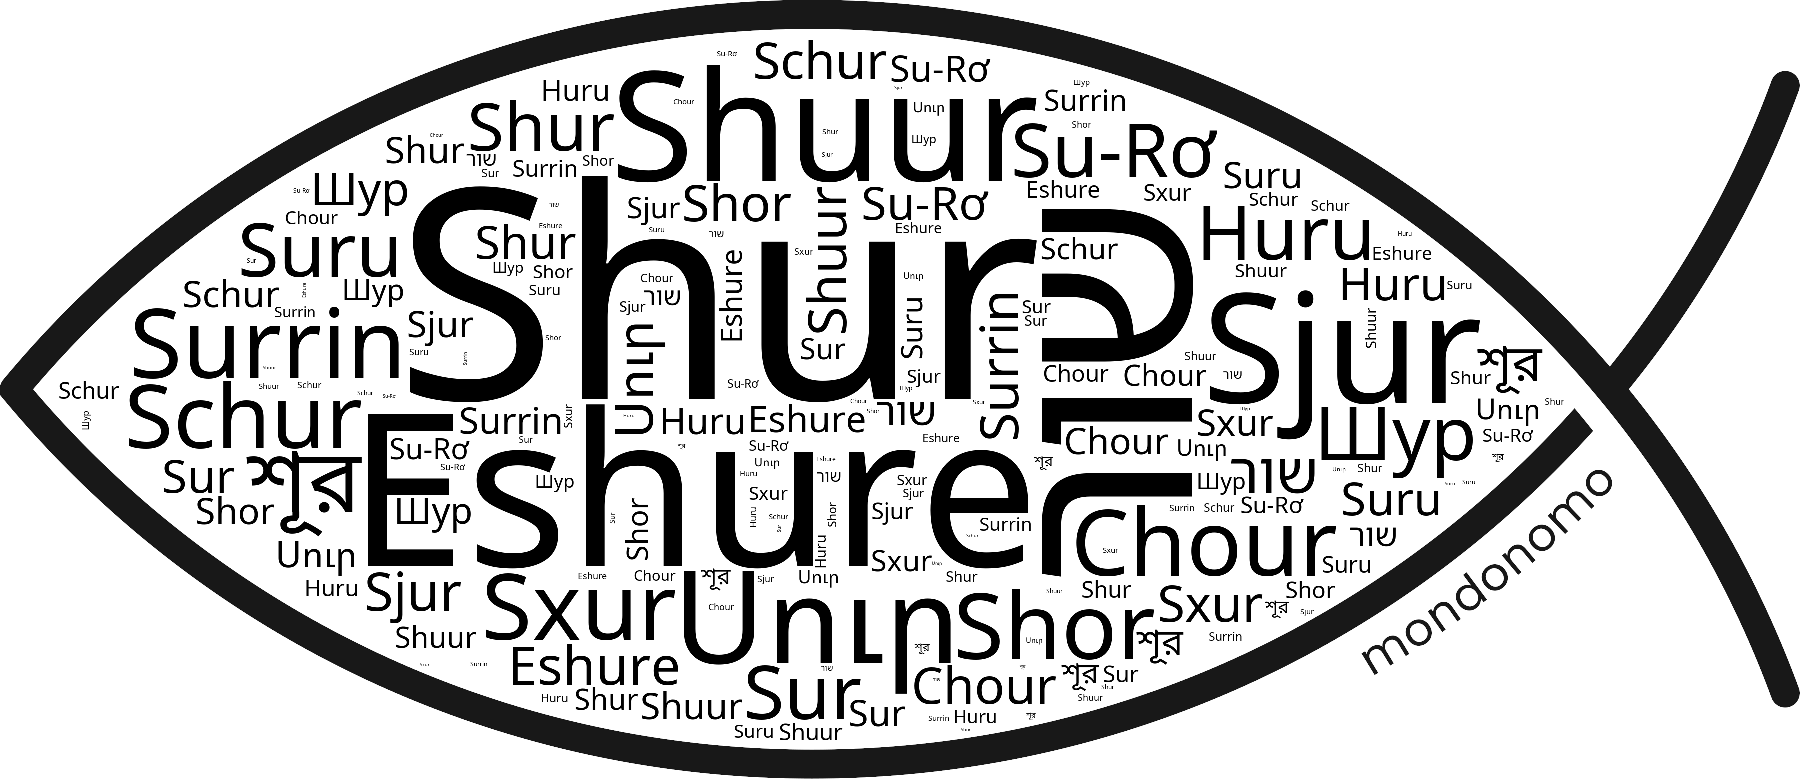 Name Shur in the world's Bibles